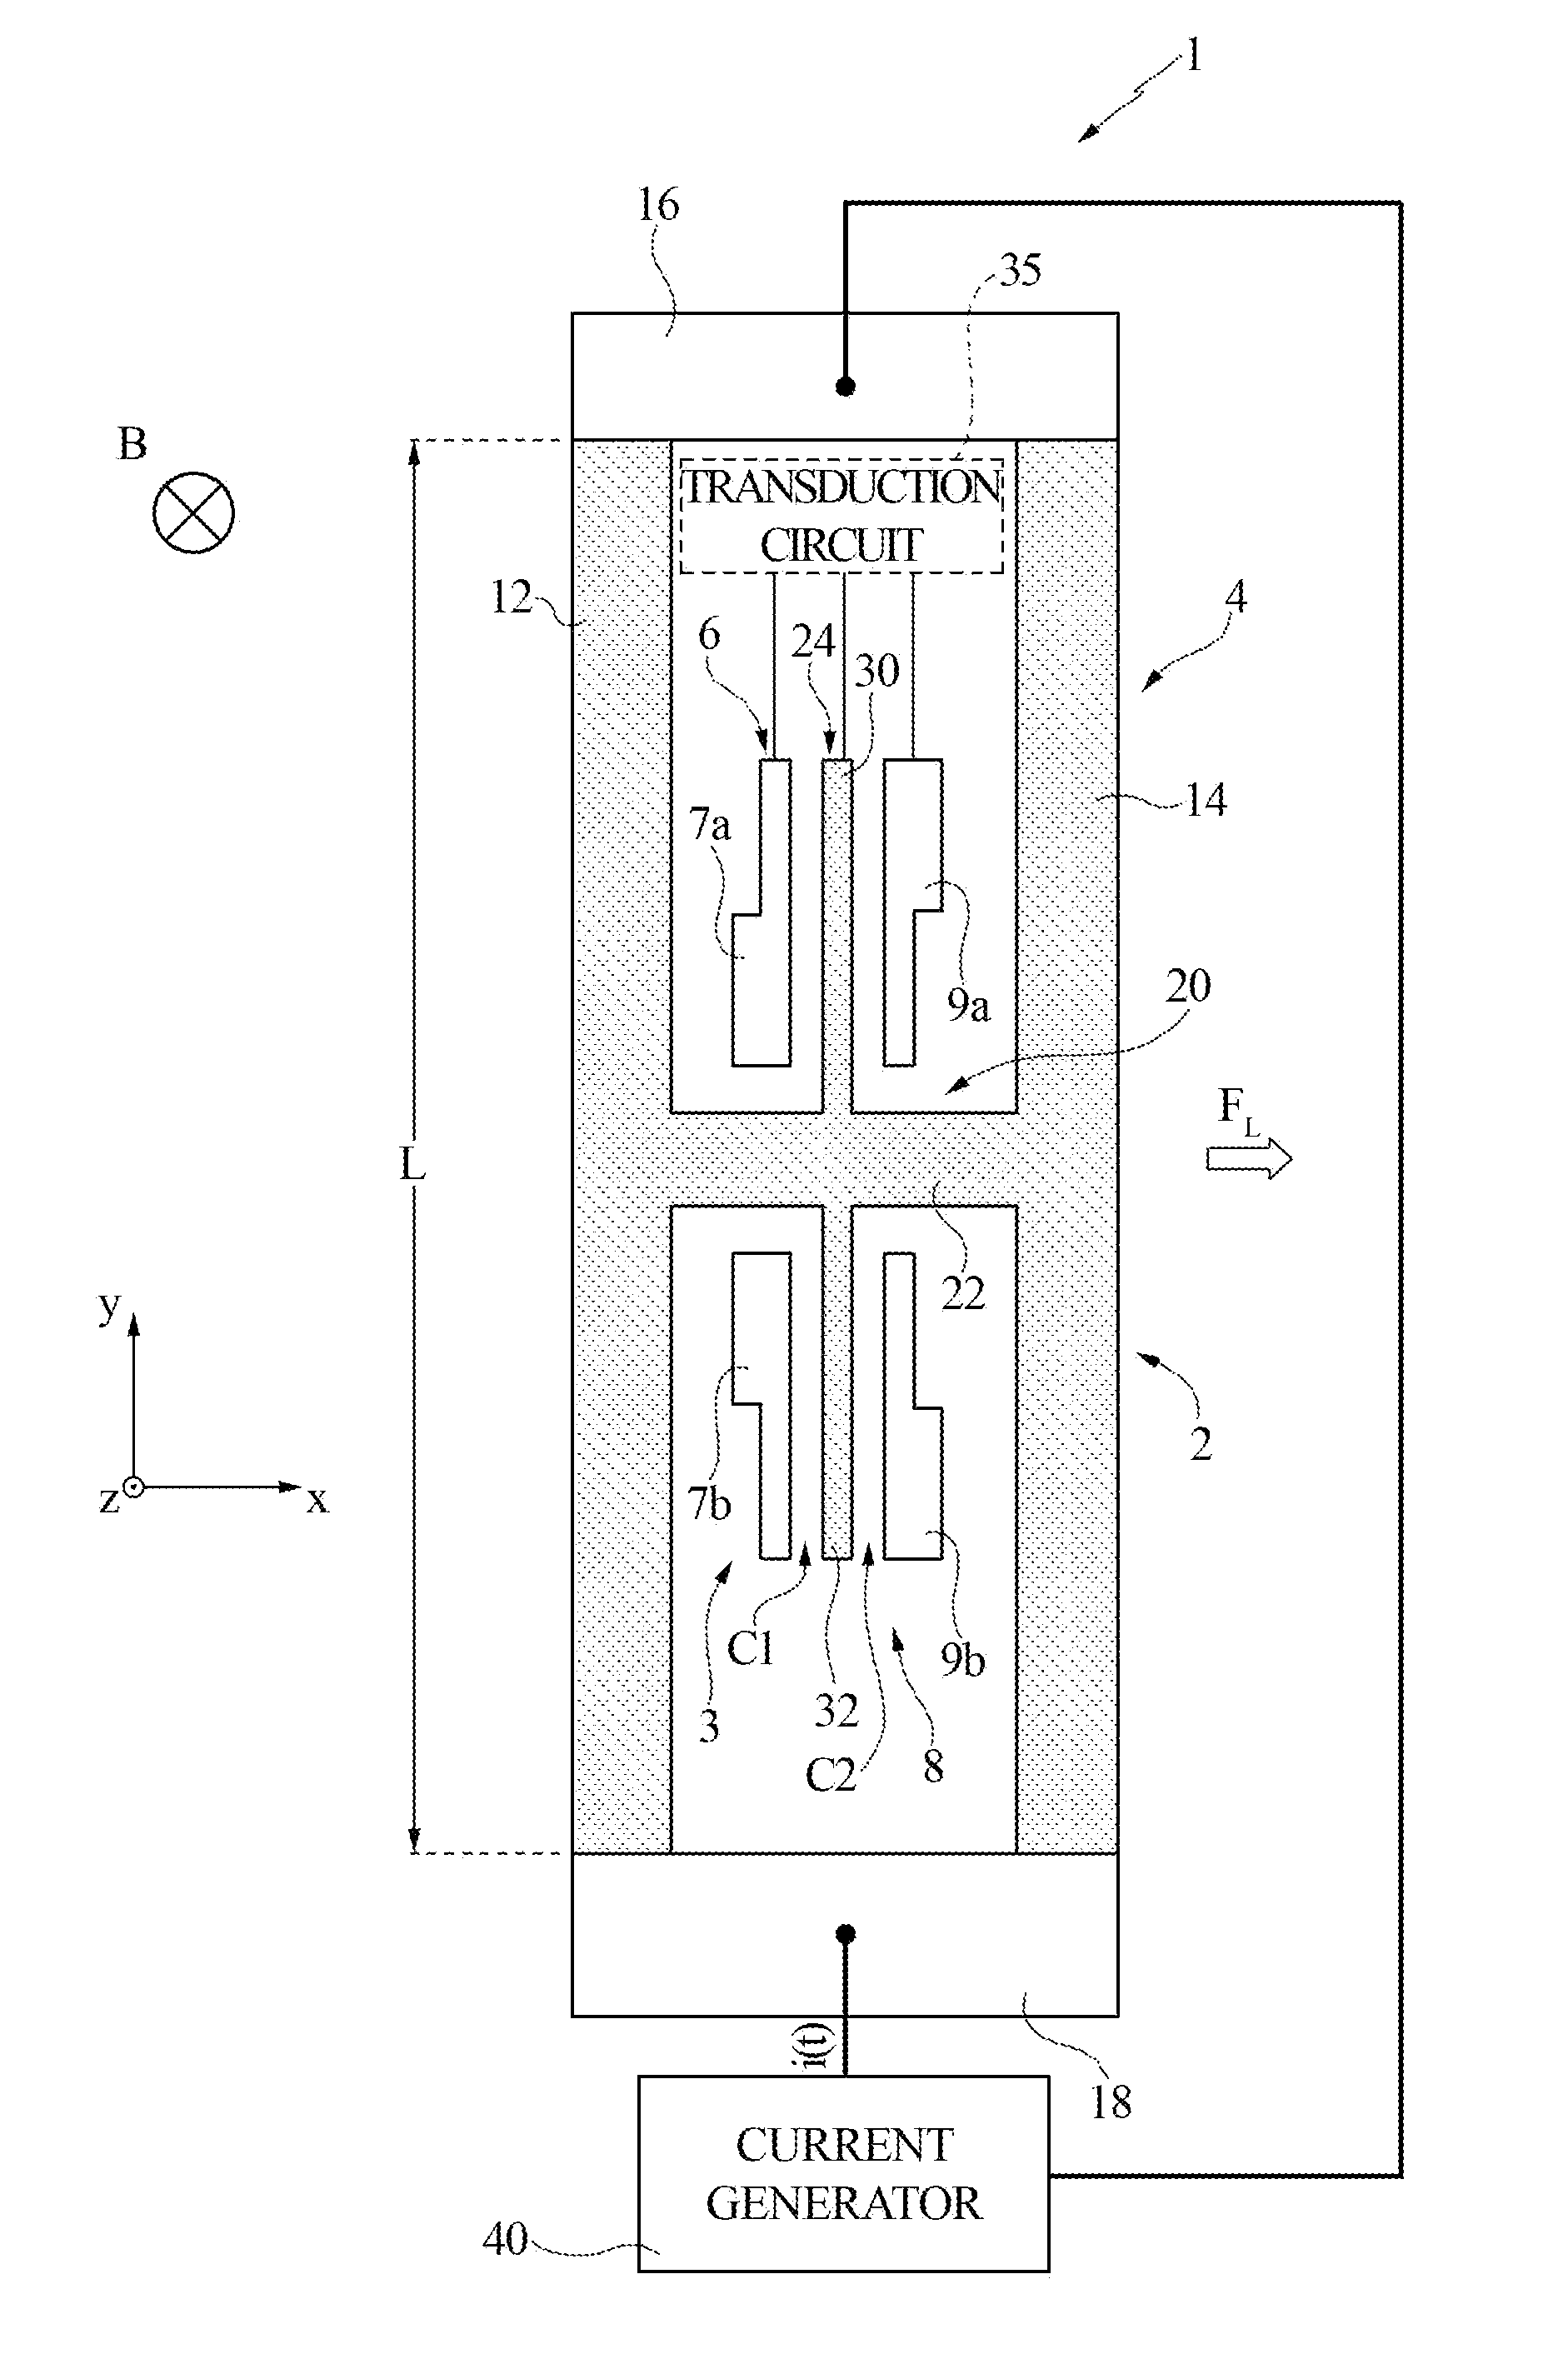 Magnetic sensor including a lorentz force transducer driven at a frequency different from the resonance frequency, and method for driving a lorentz force transducer